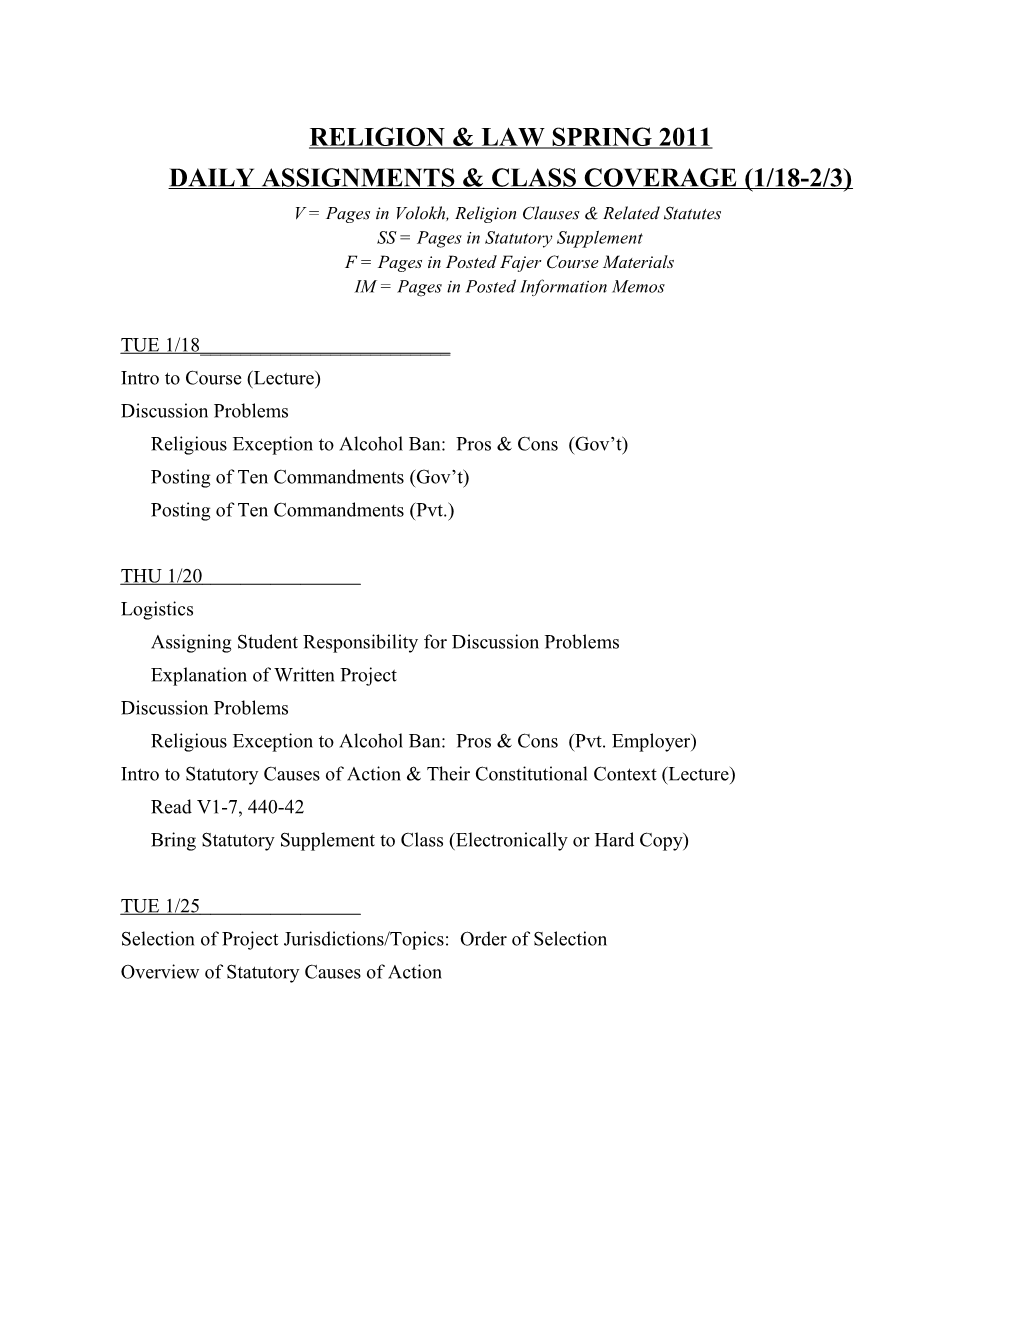 Daily Assignments & Class Coverage (1/18-2/3)